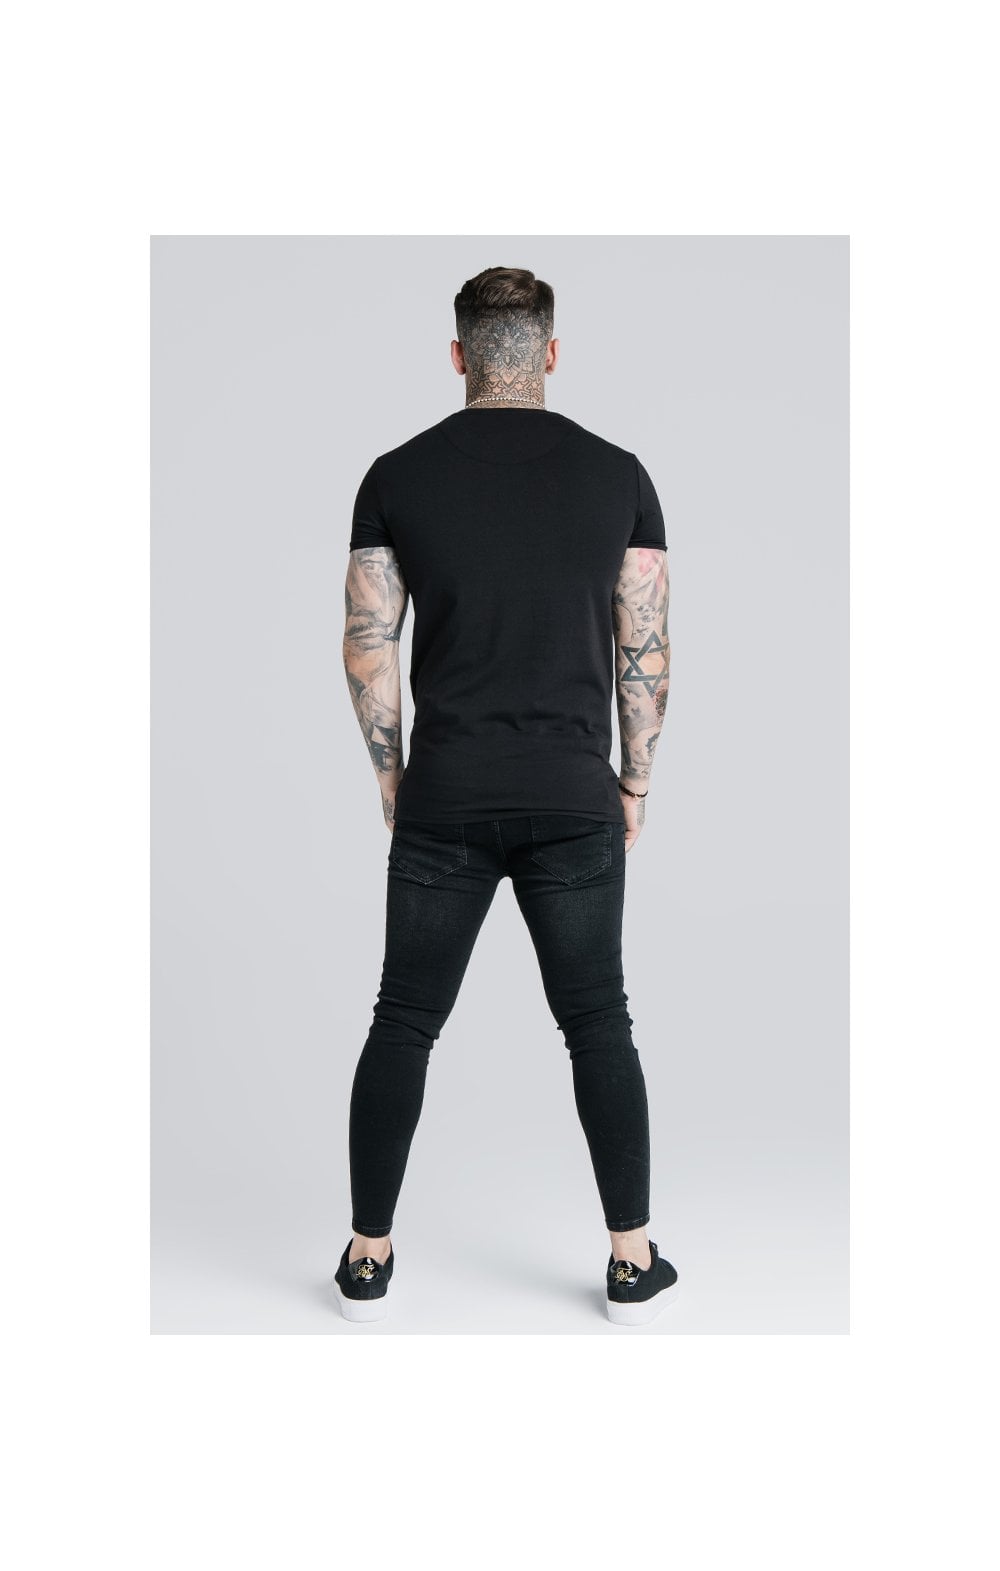 Black Essential Muscle Fit T-Shirt (5)